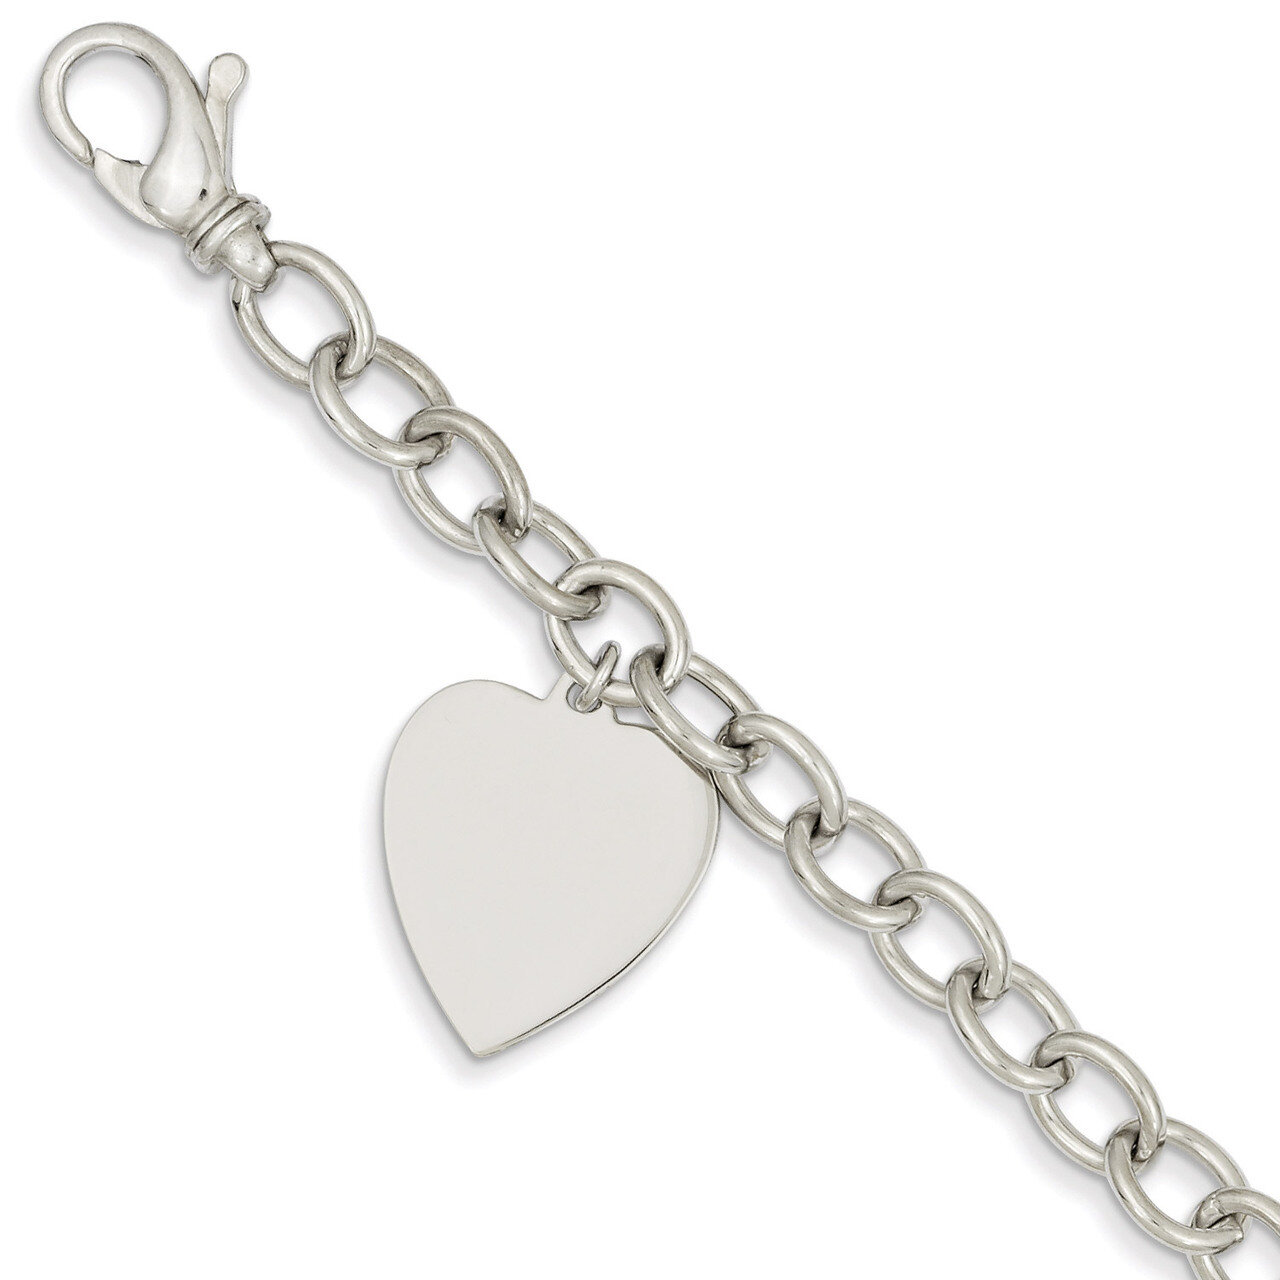 8.5in Polished Engravable Link with Heart Charm Bracelet 8.5 Inch 14k White Gold WLK313-8.5